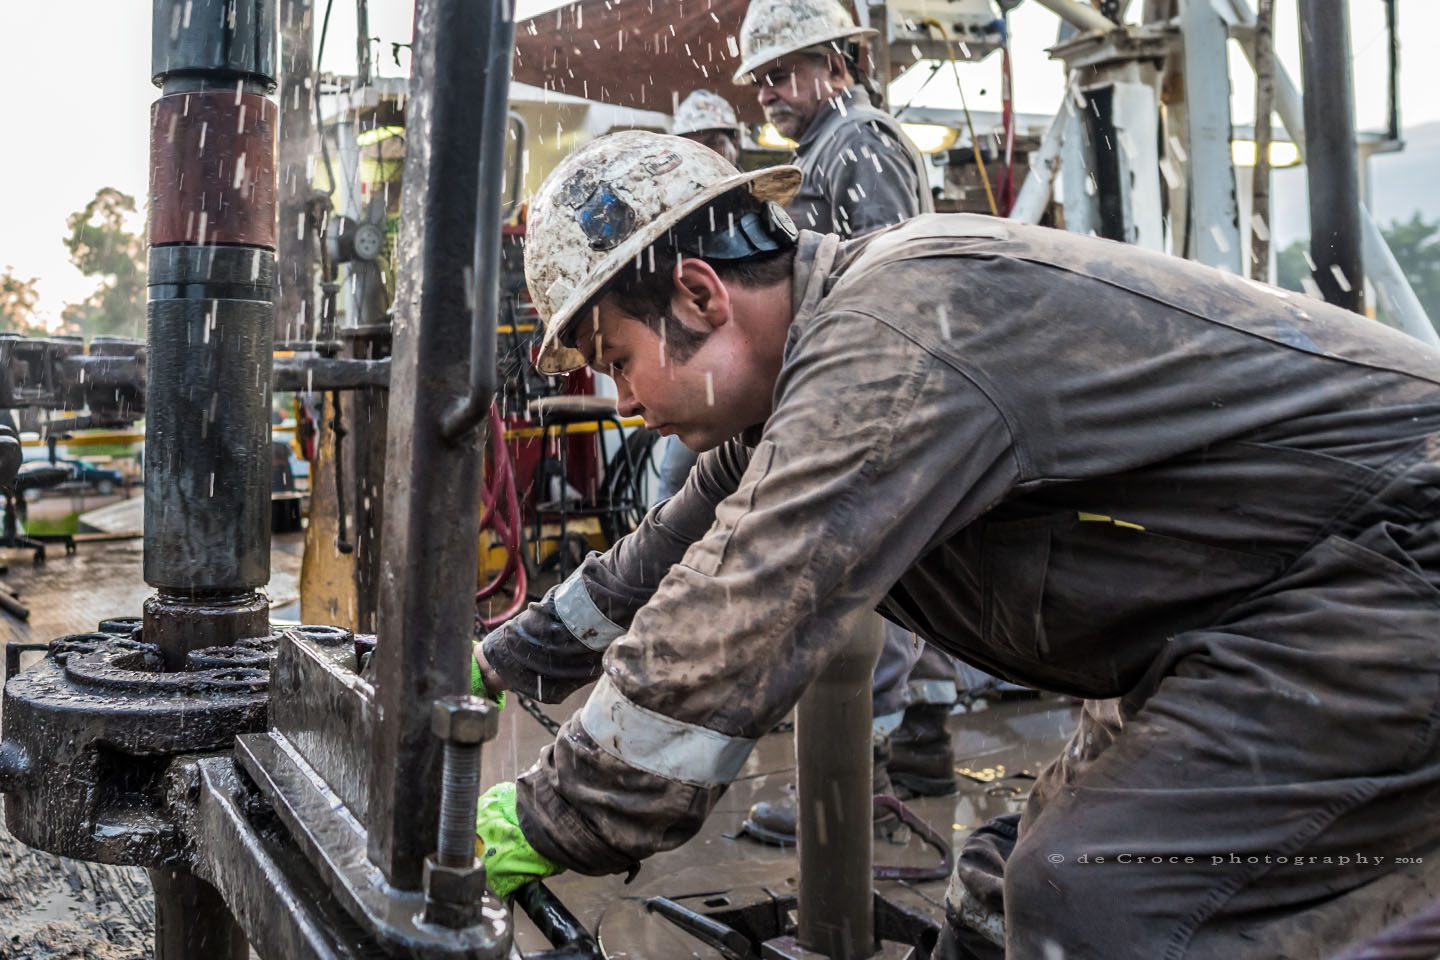 A roughneck connects drilling pipe as photographer gets sprayed.